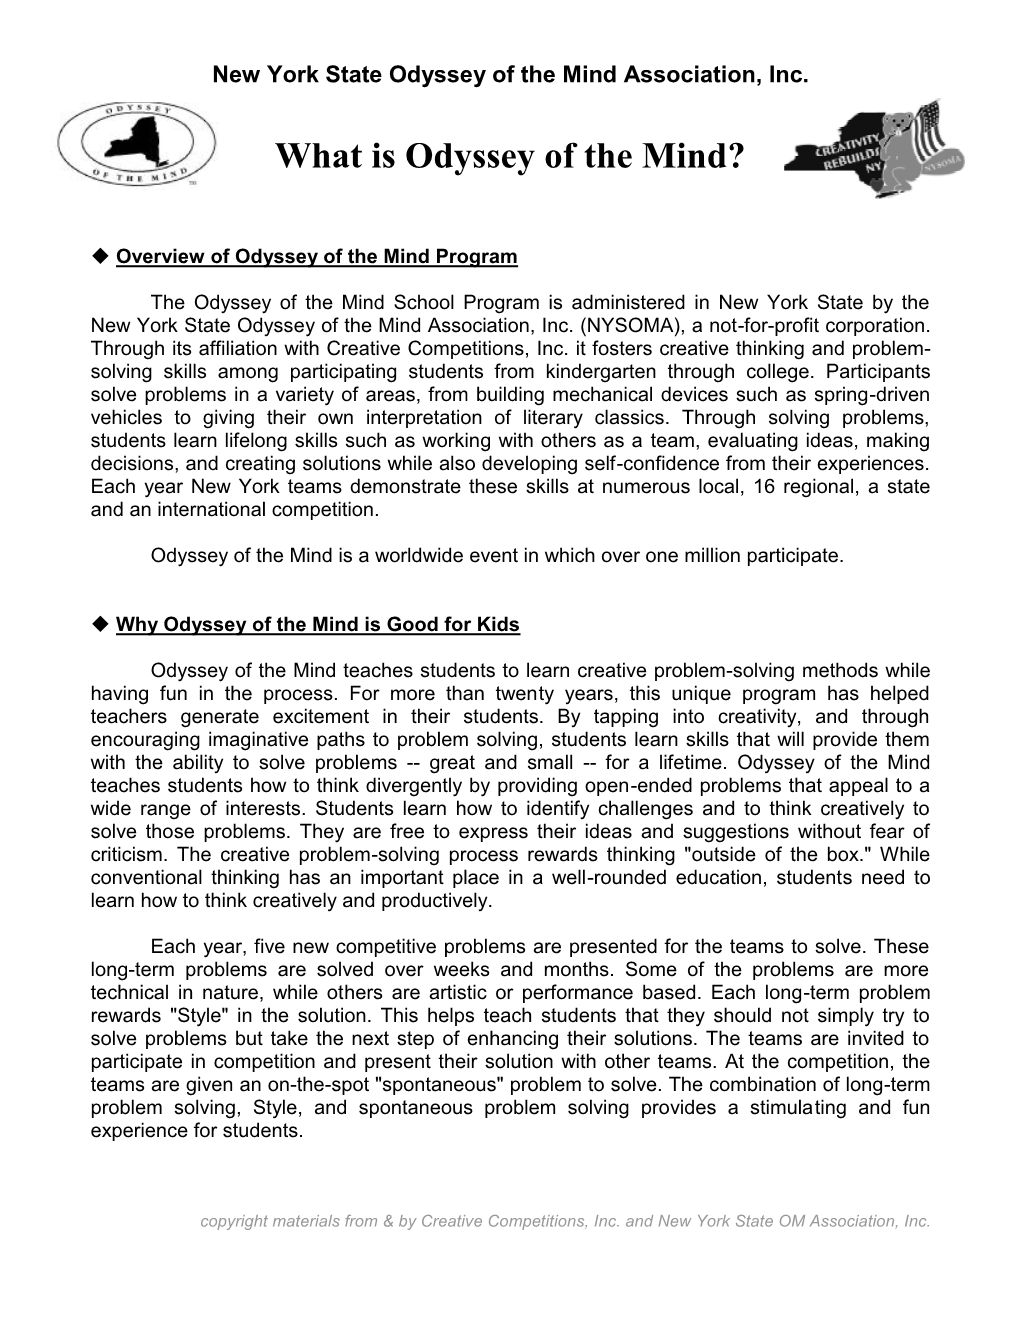 What Is Odyssey of the Mind?